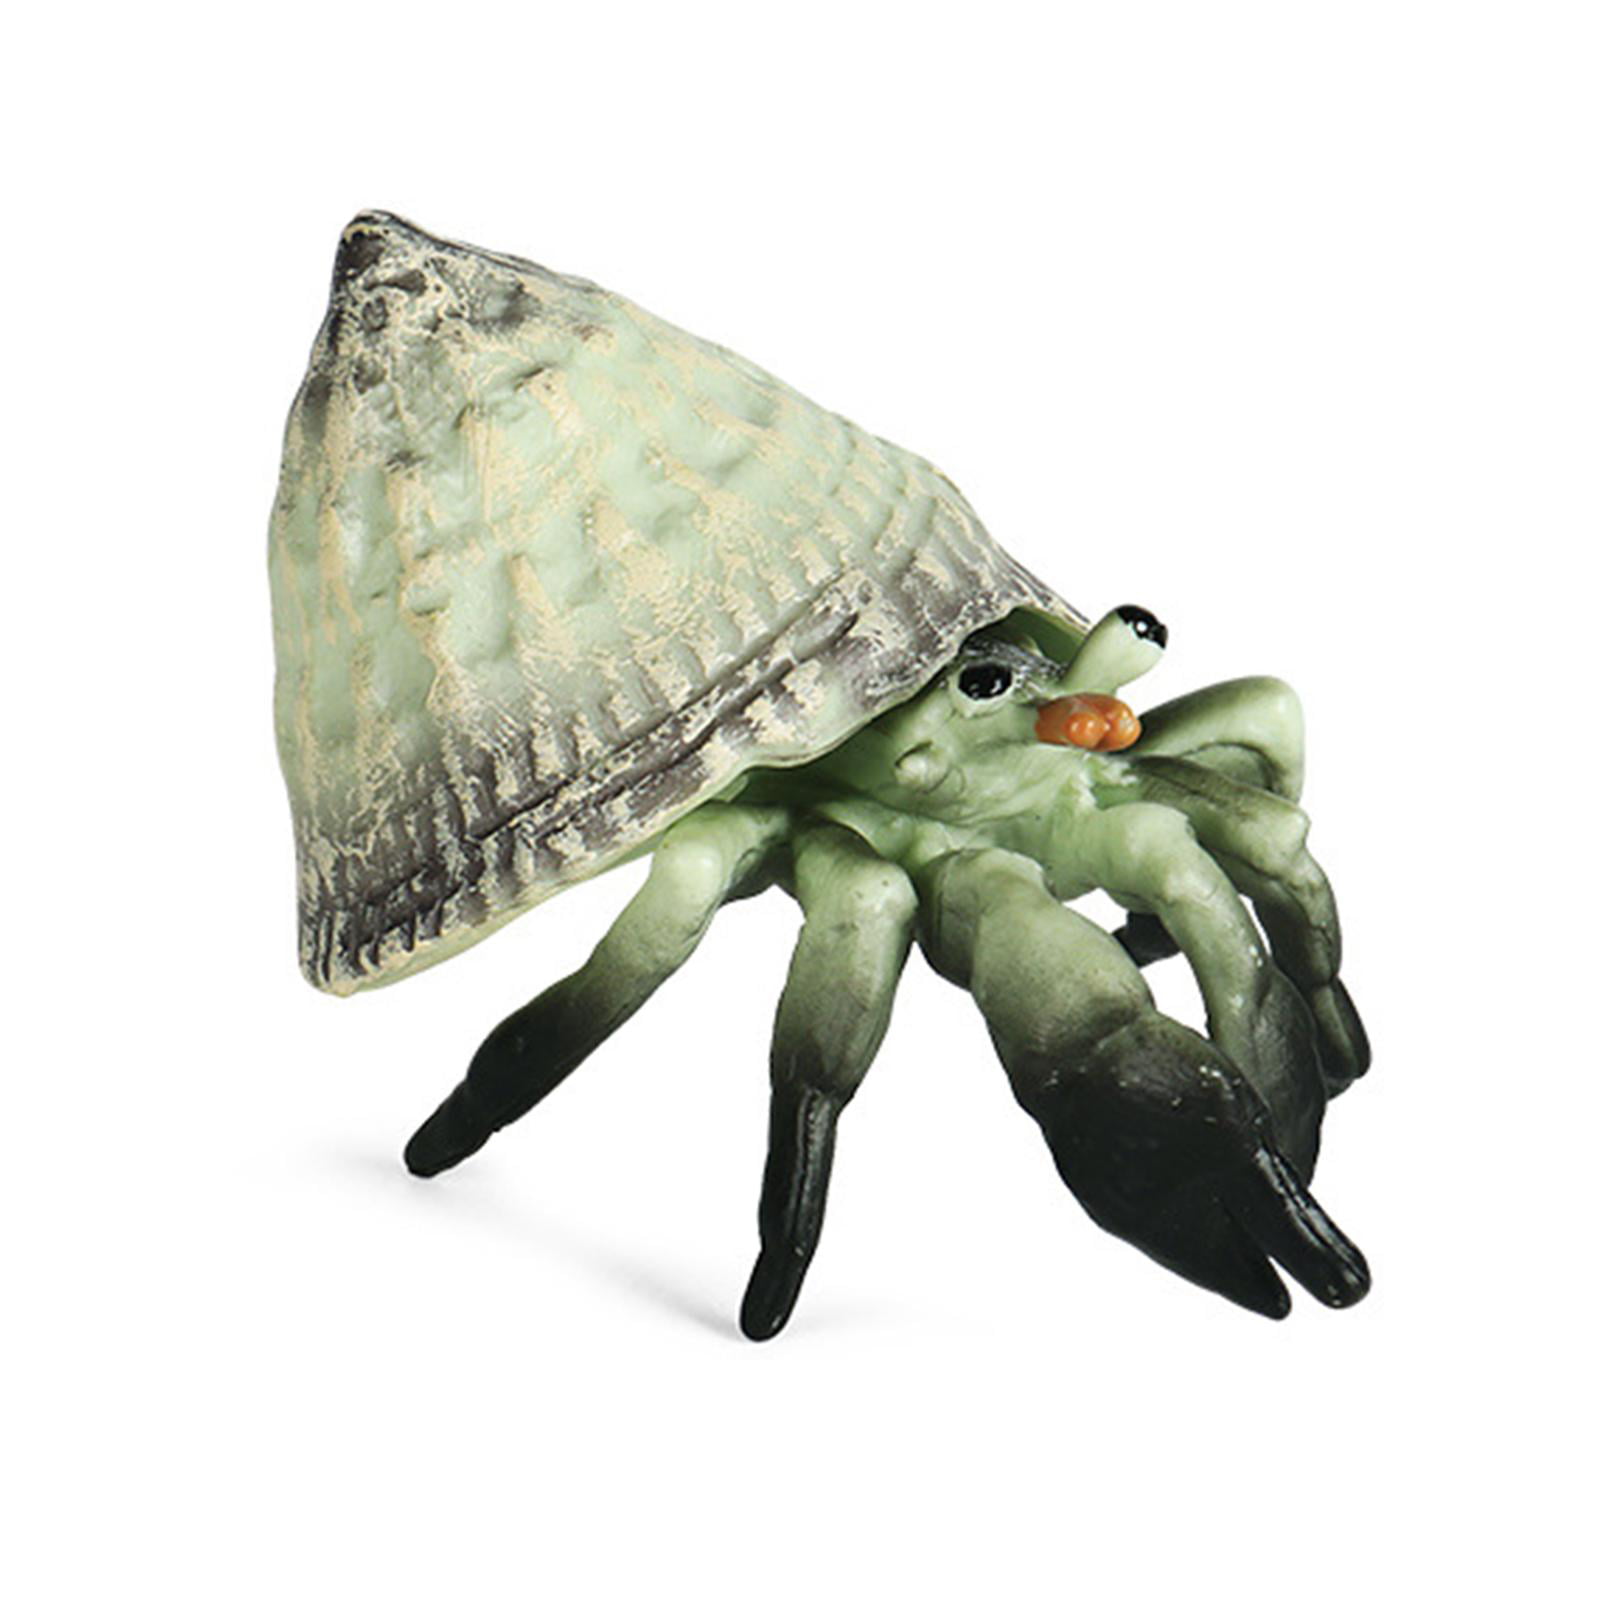 Ocean Animal Model Hermit Crab Kids Science Learning Toy Home Decor 